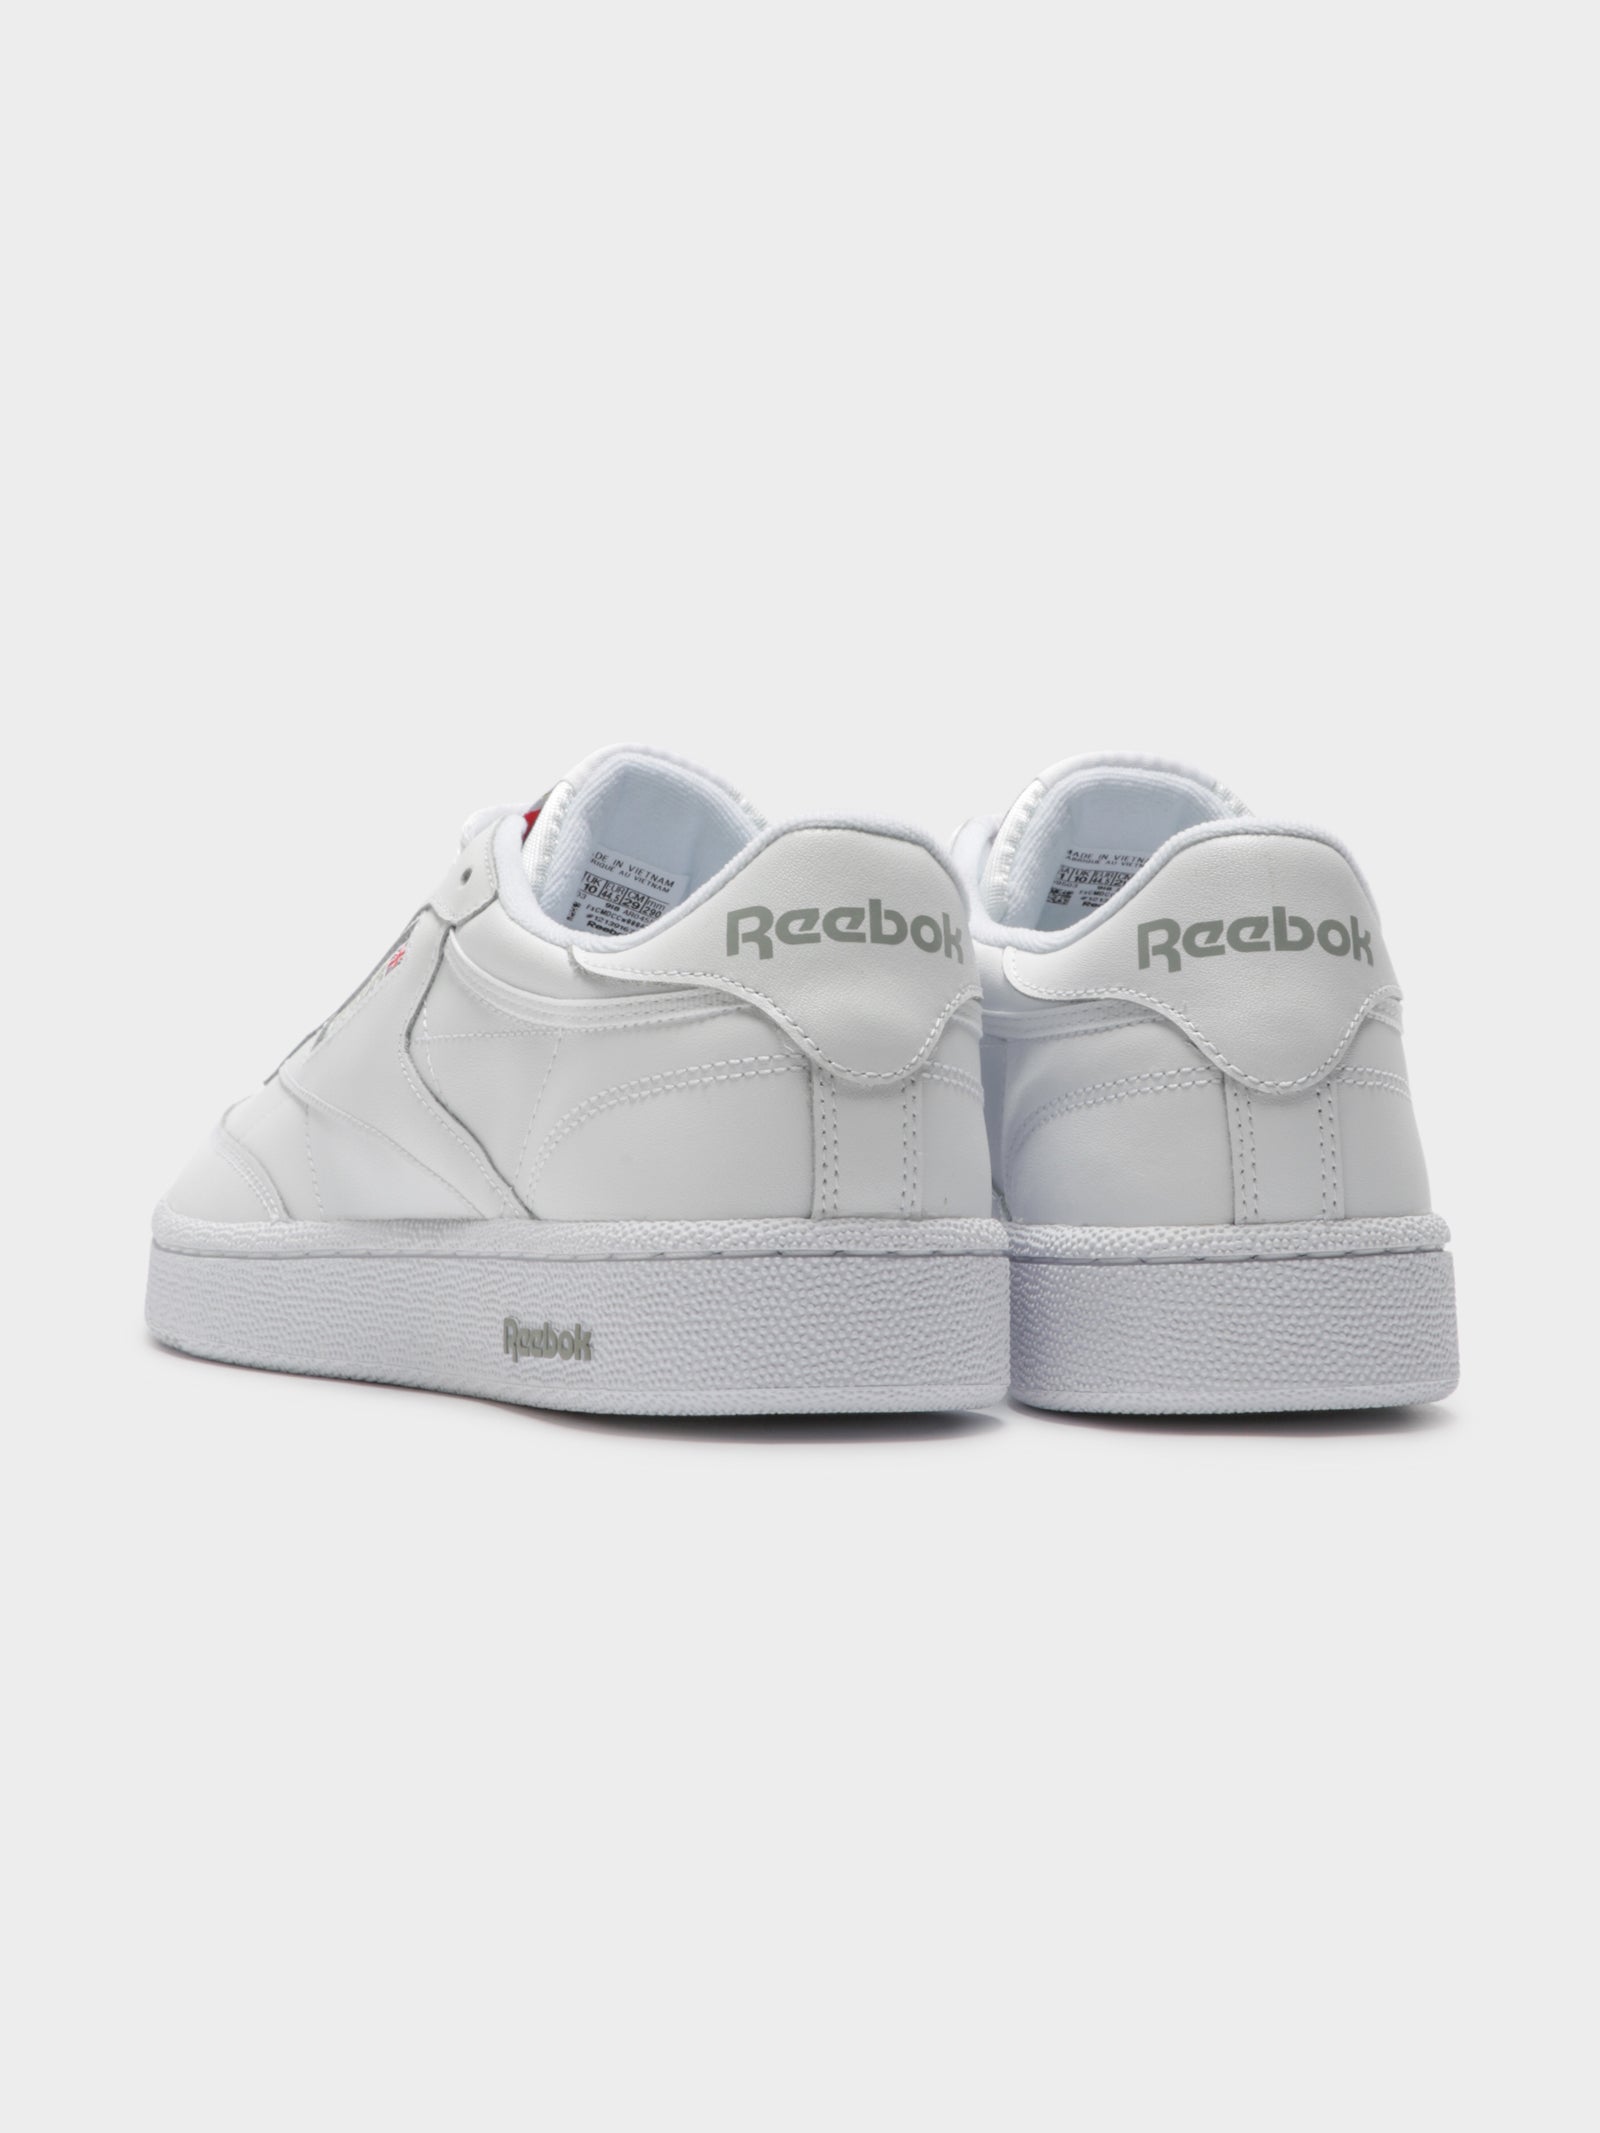 Unisex Club C 85 Sneakers in White & Grey Leather